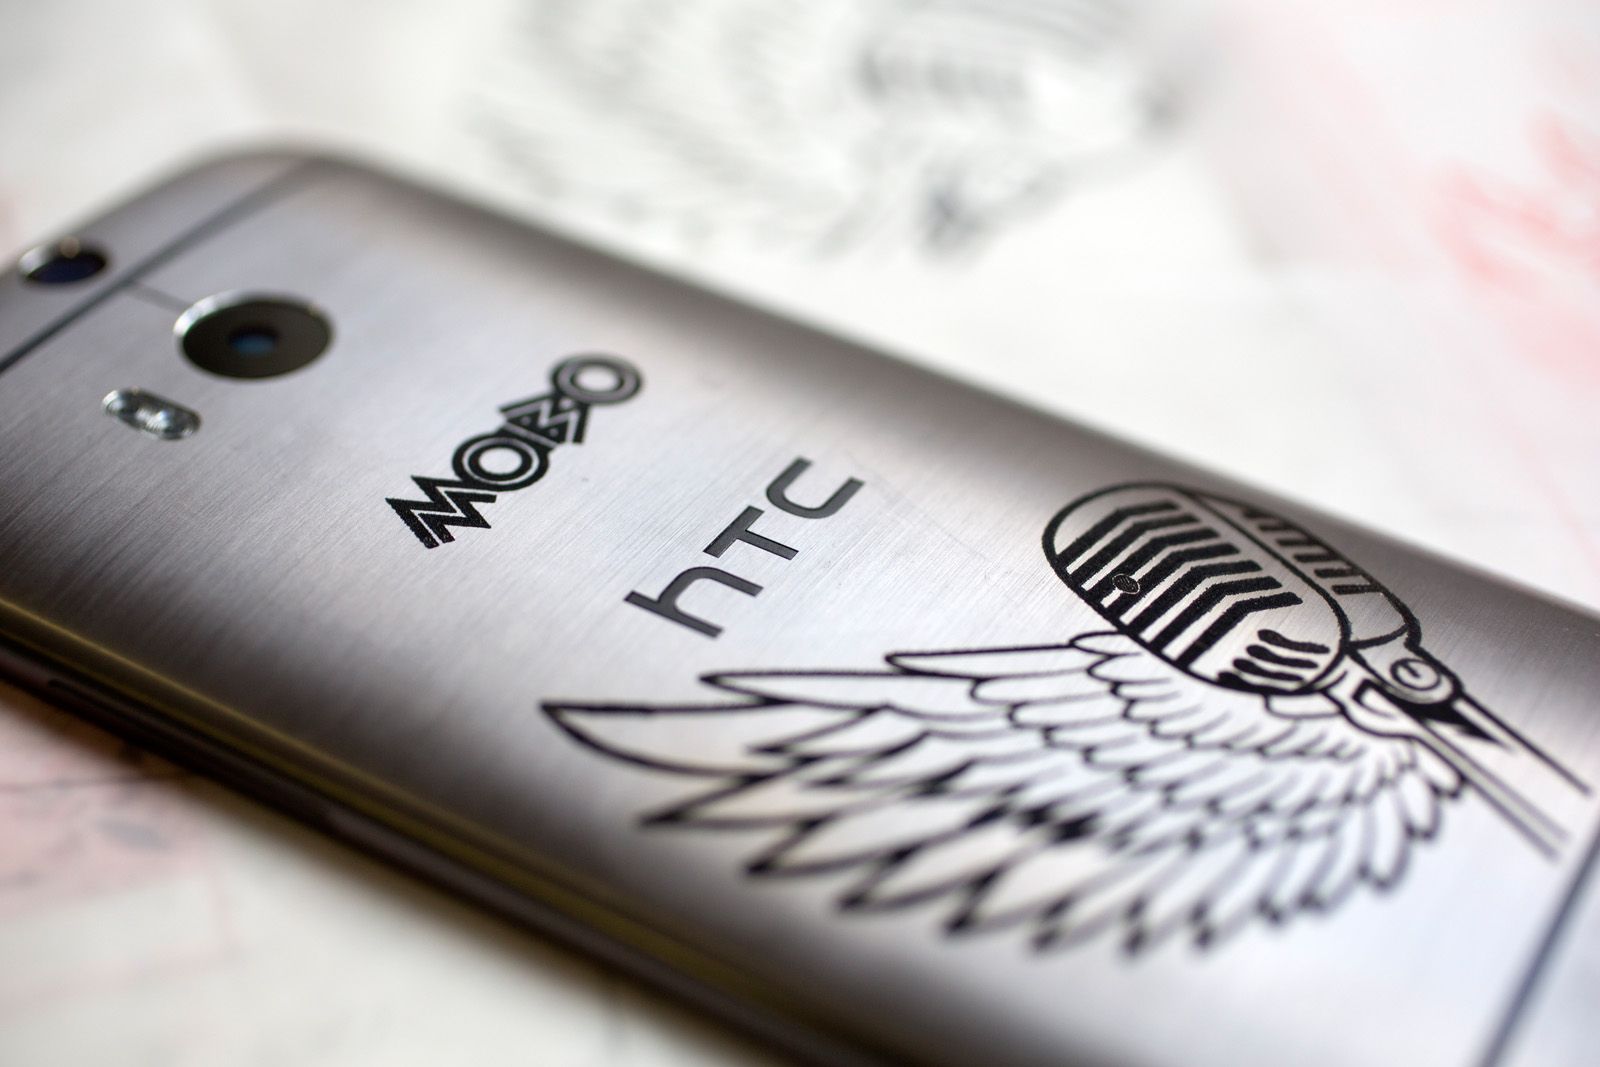 limited mobo 2014 edition htc one m8 gets its tats out image 1